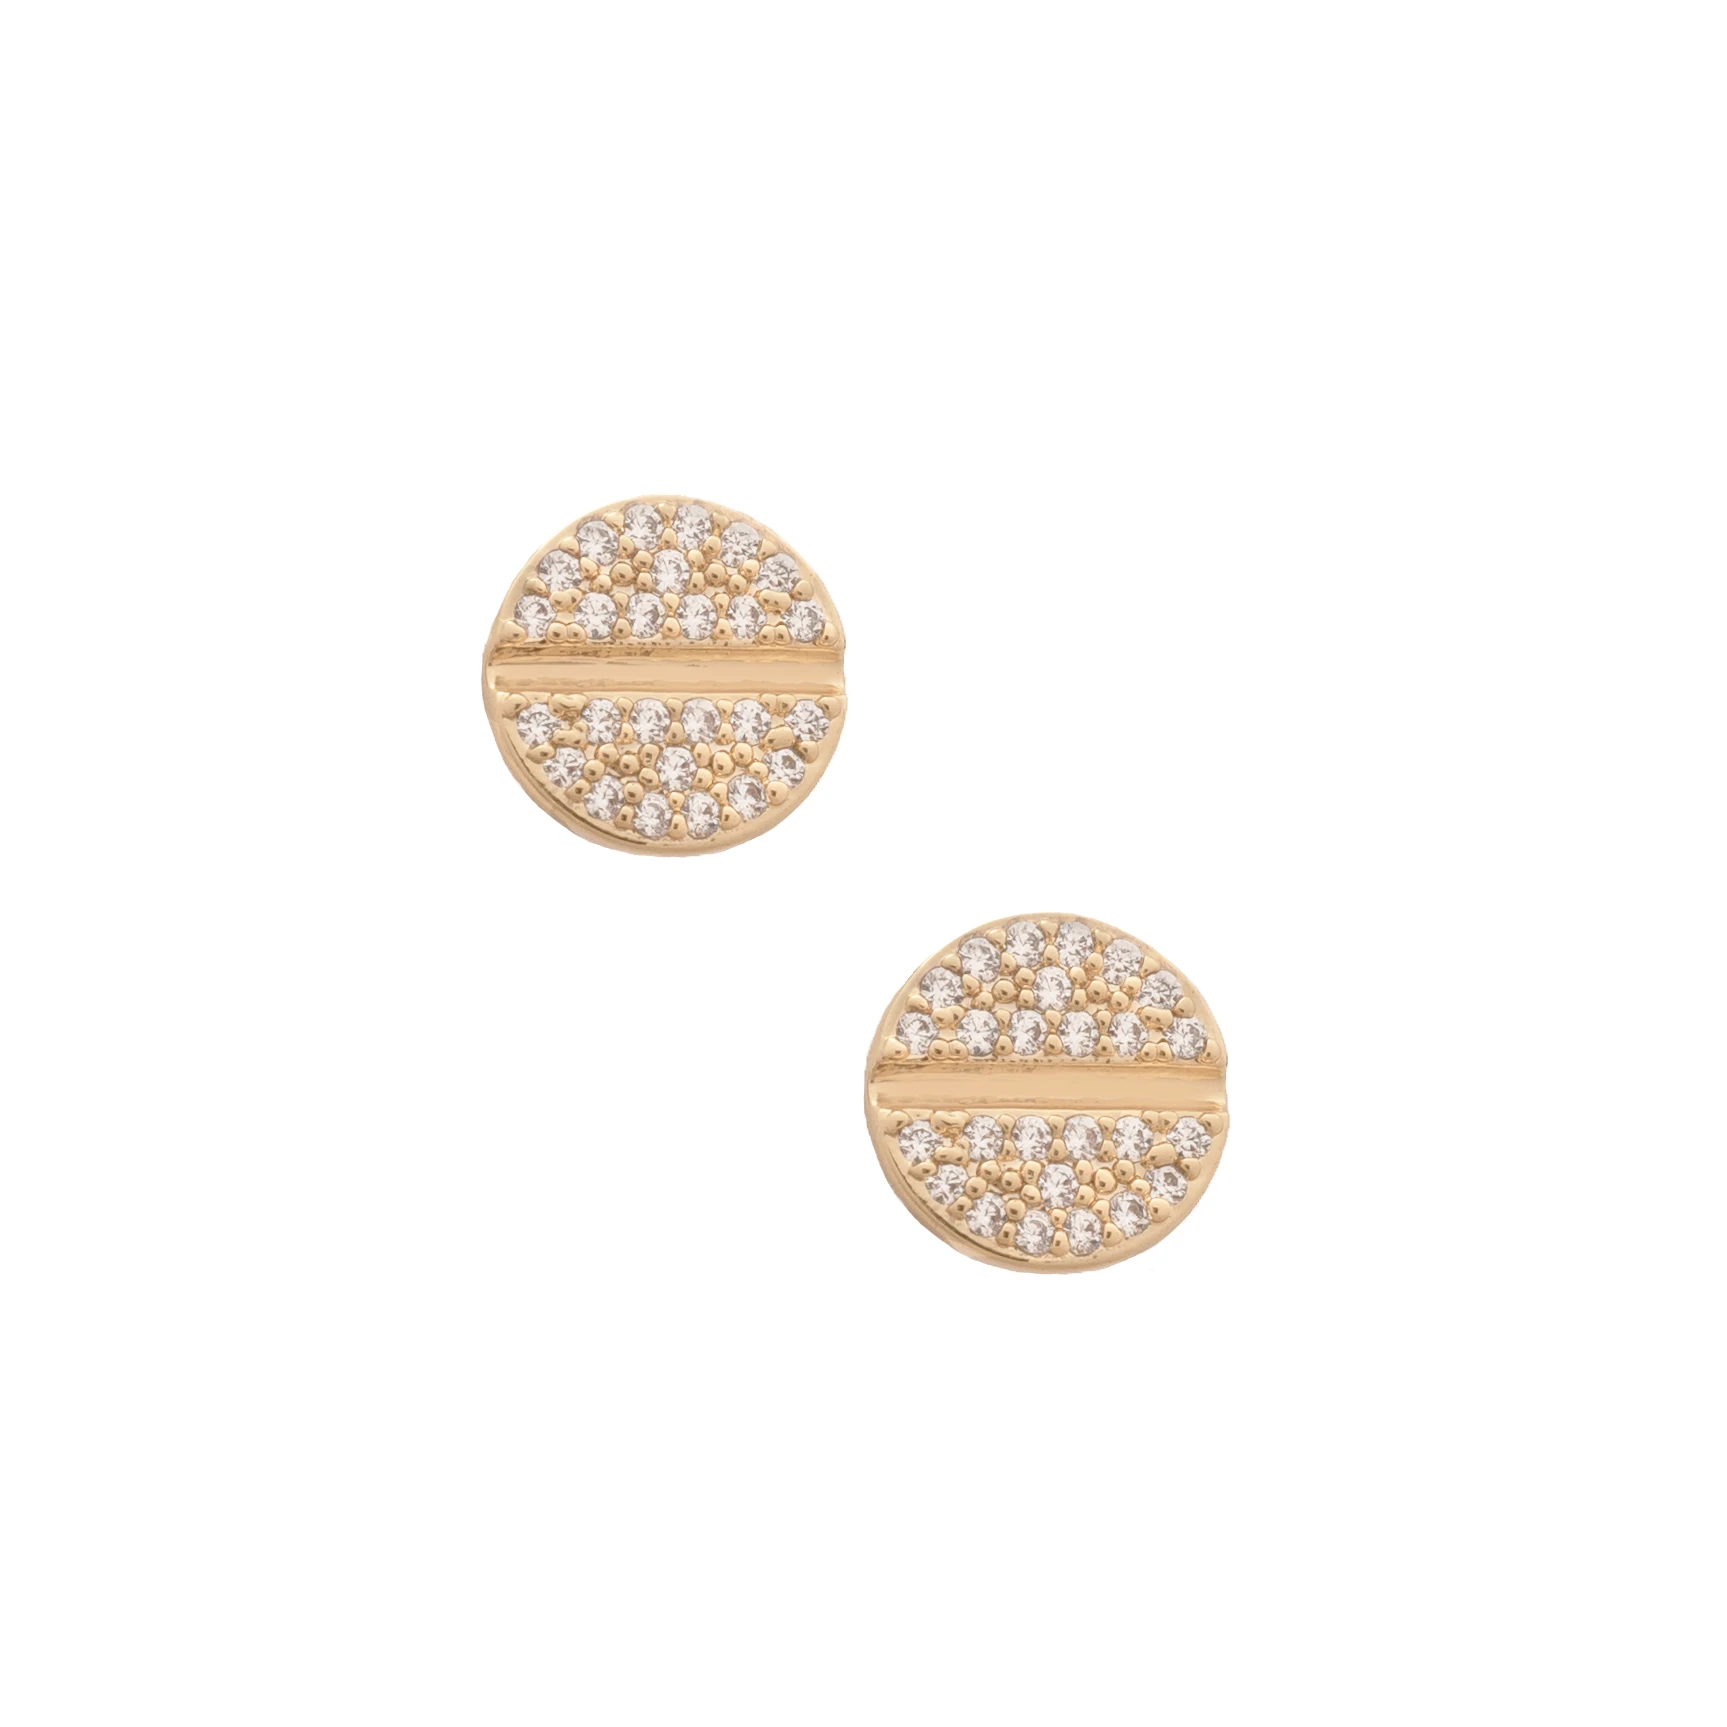 Uncommon James: Grand Central Earrings - Gold